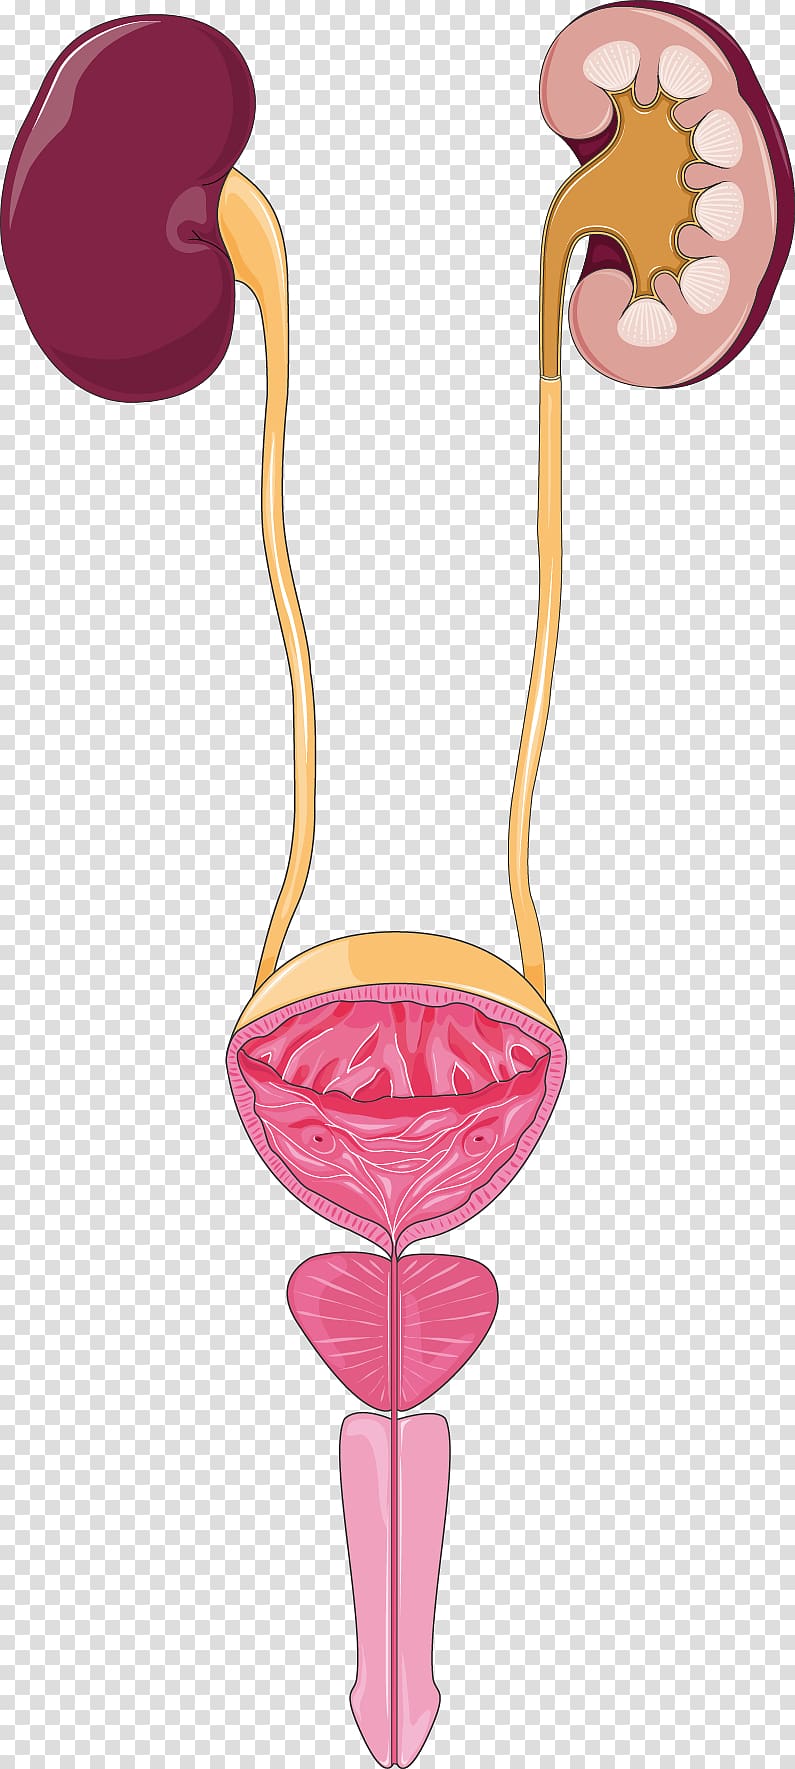 Excretory system Urine Urinary tract infection Kidney, others transparent background PNG clipart